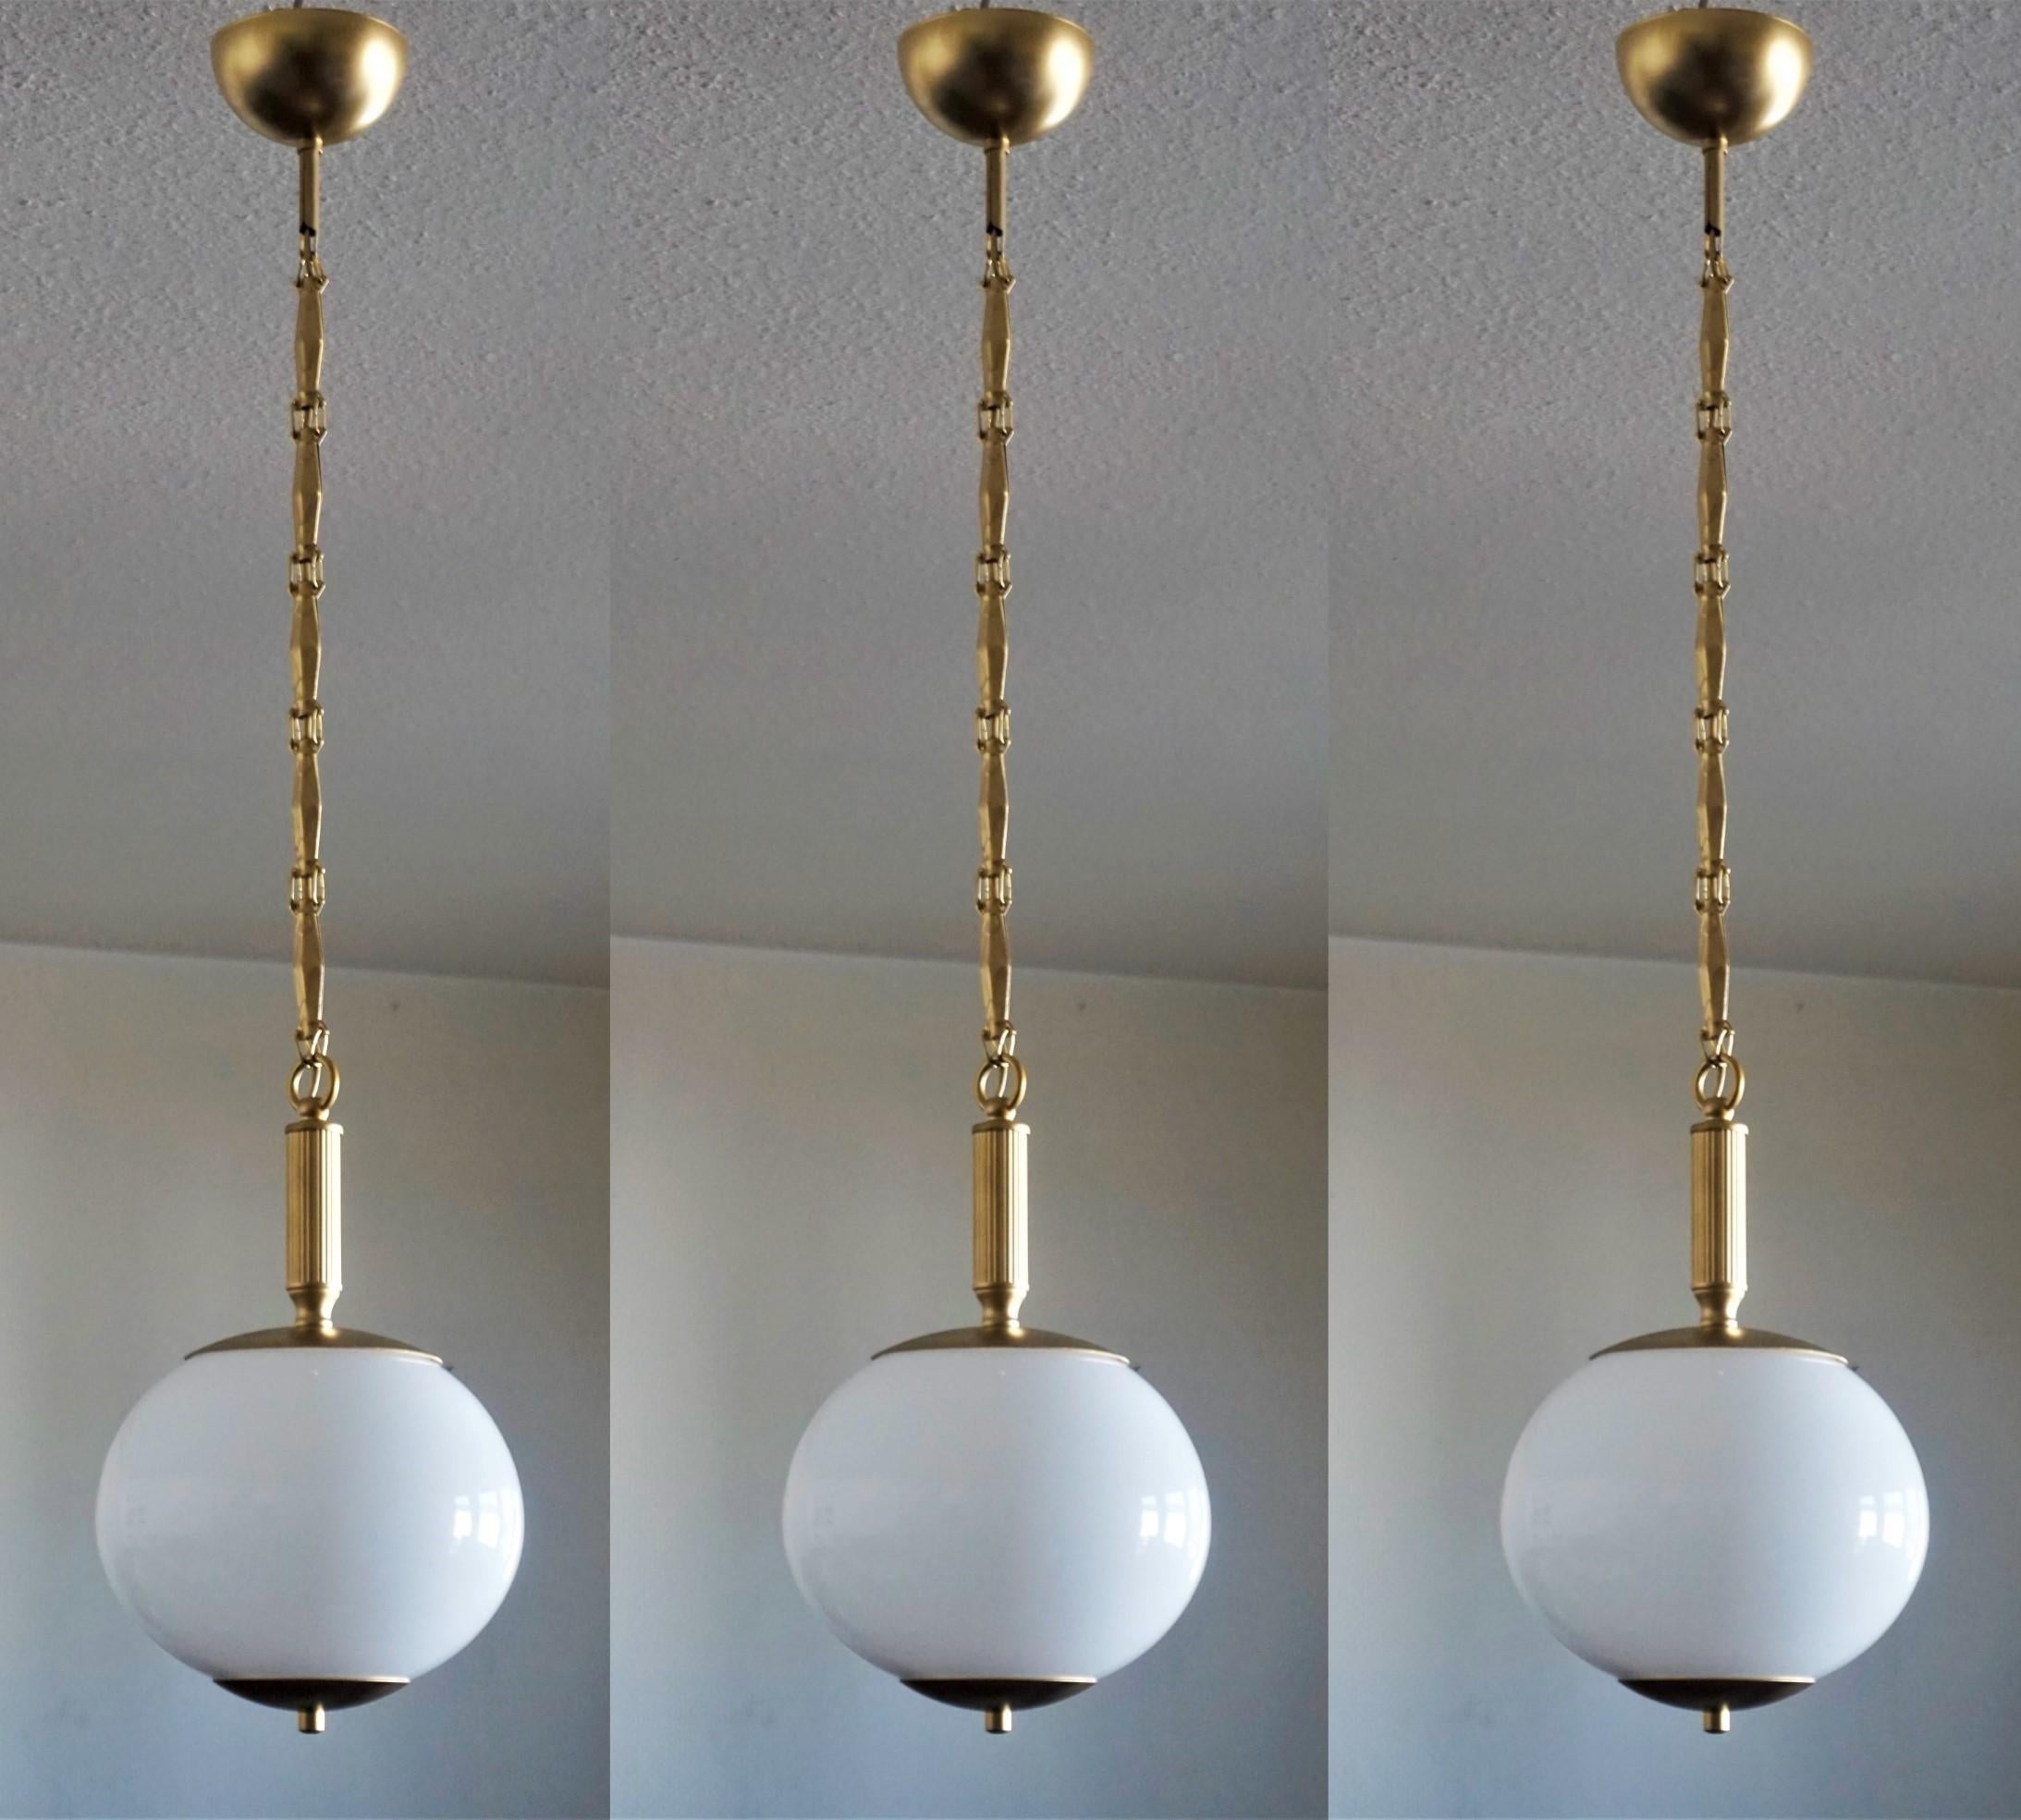 A set of three Italian hand blown opaline globe pendants, brass mounts, chain and canopy, 1950-1959.
With a single brass and porcelain Edison E-27 light socket for large sized bulb (each pendant).
Measures: Height 33 in / 84 cm, adjustable by